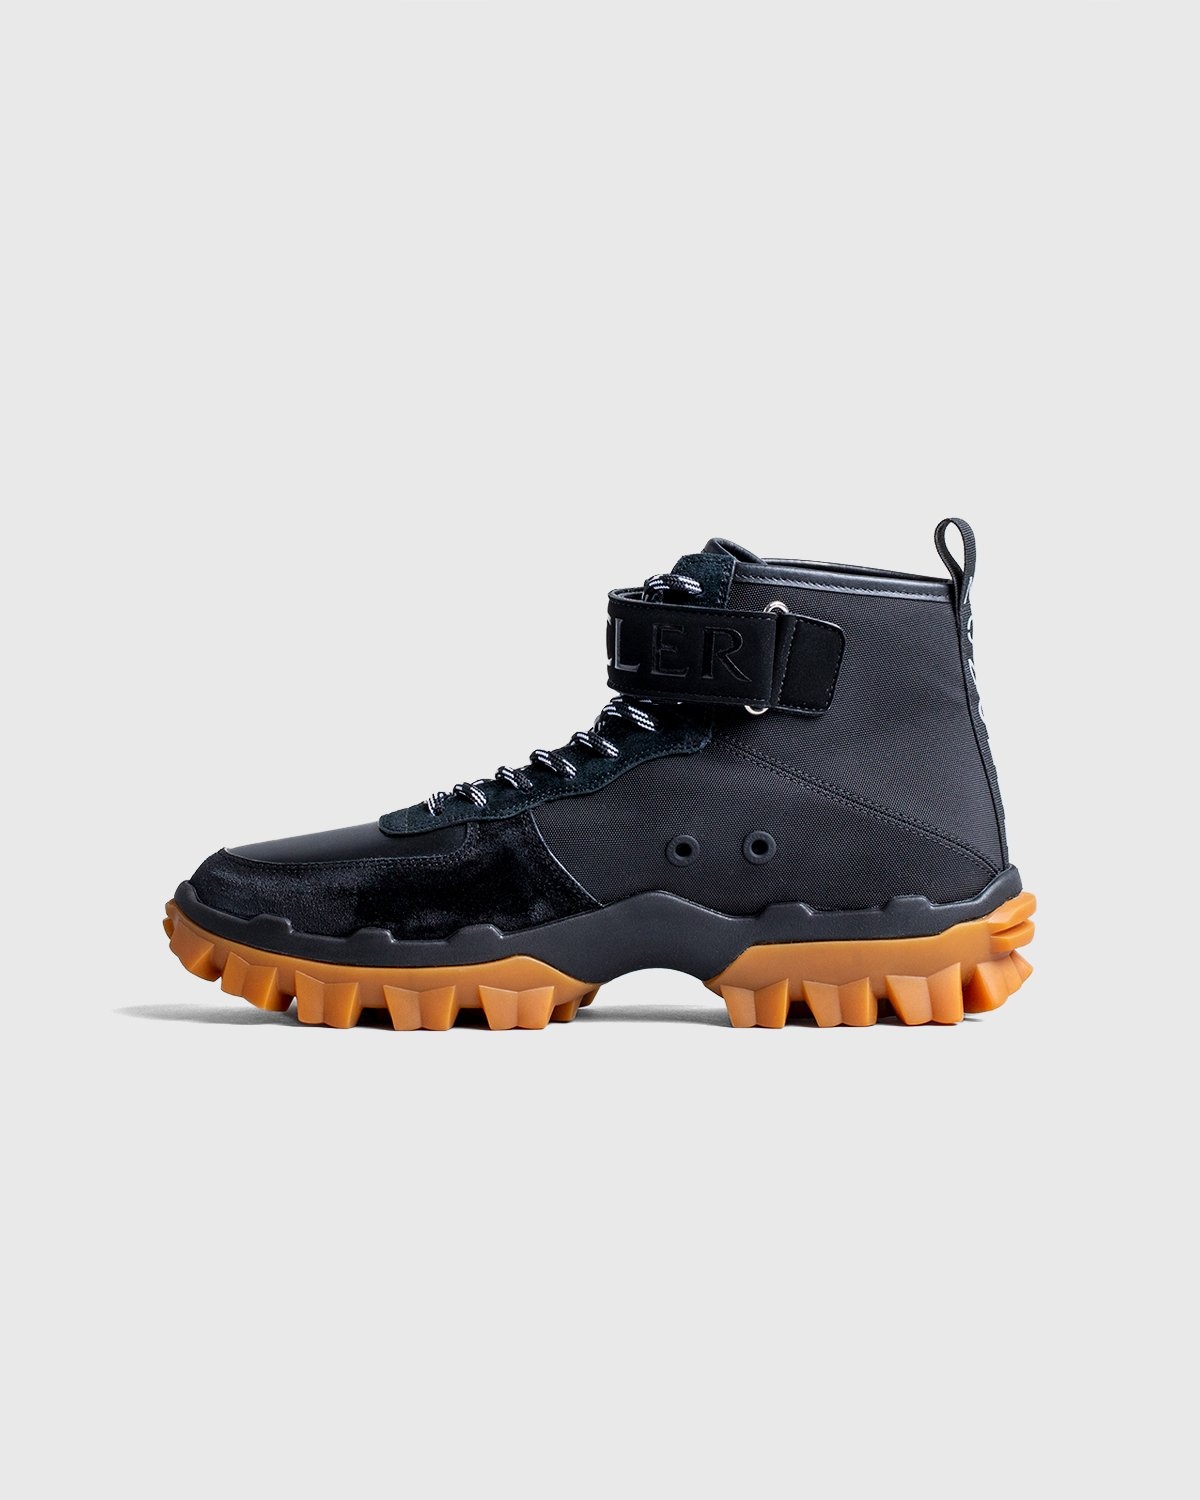 Moncler Genius – Recycled Hugo Shoes - Hiking Boots - Black - Image 2